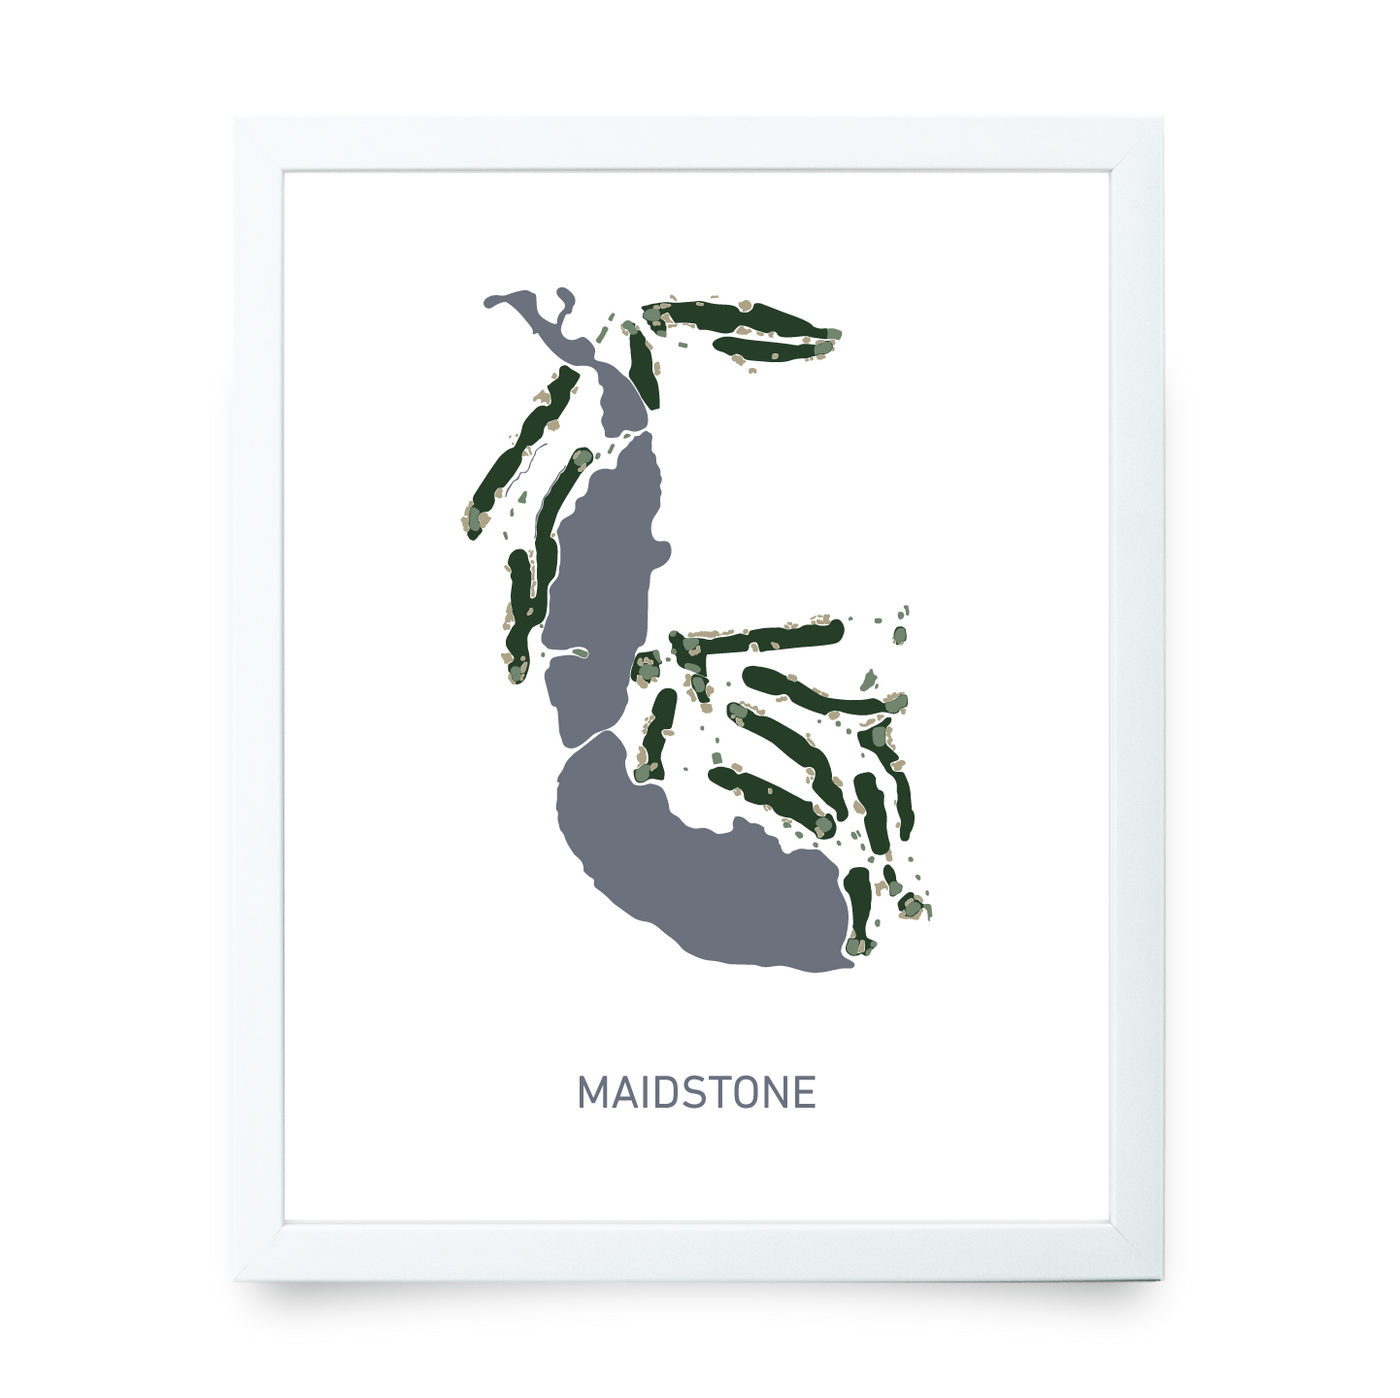 Maidstone (Traditional)